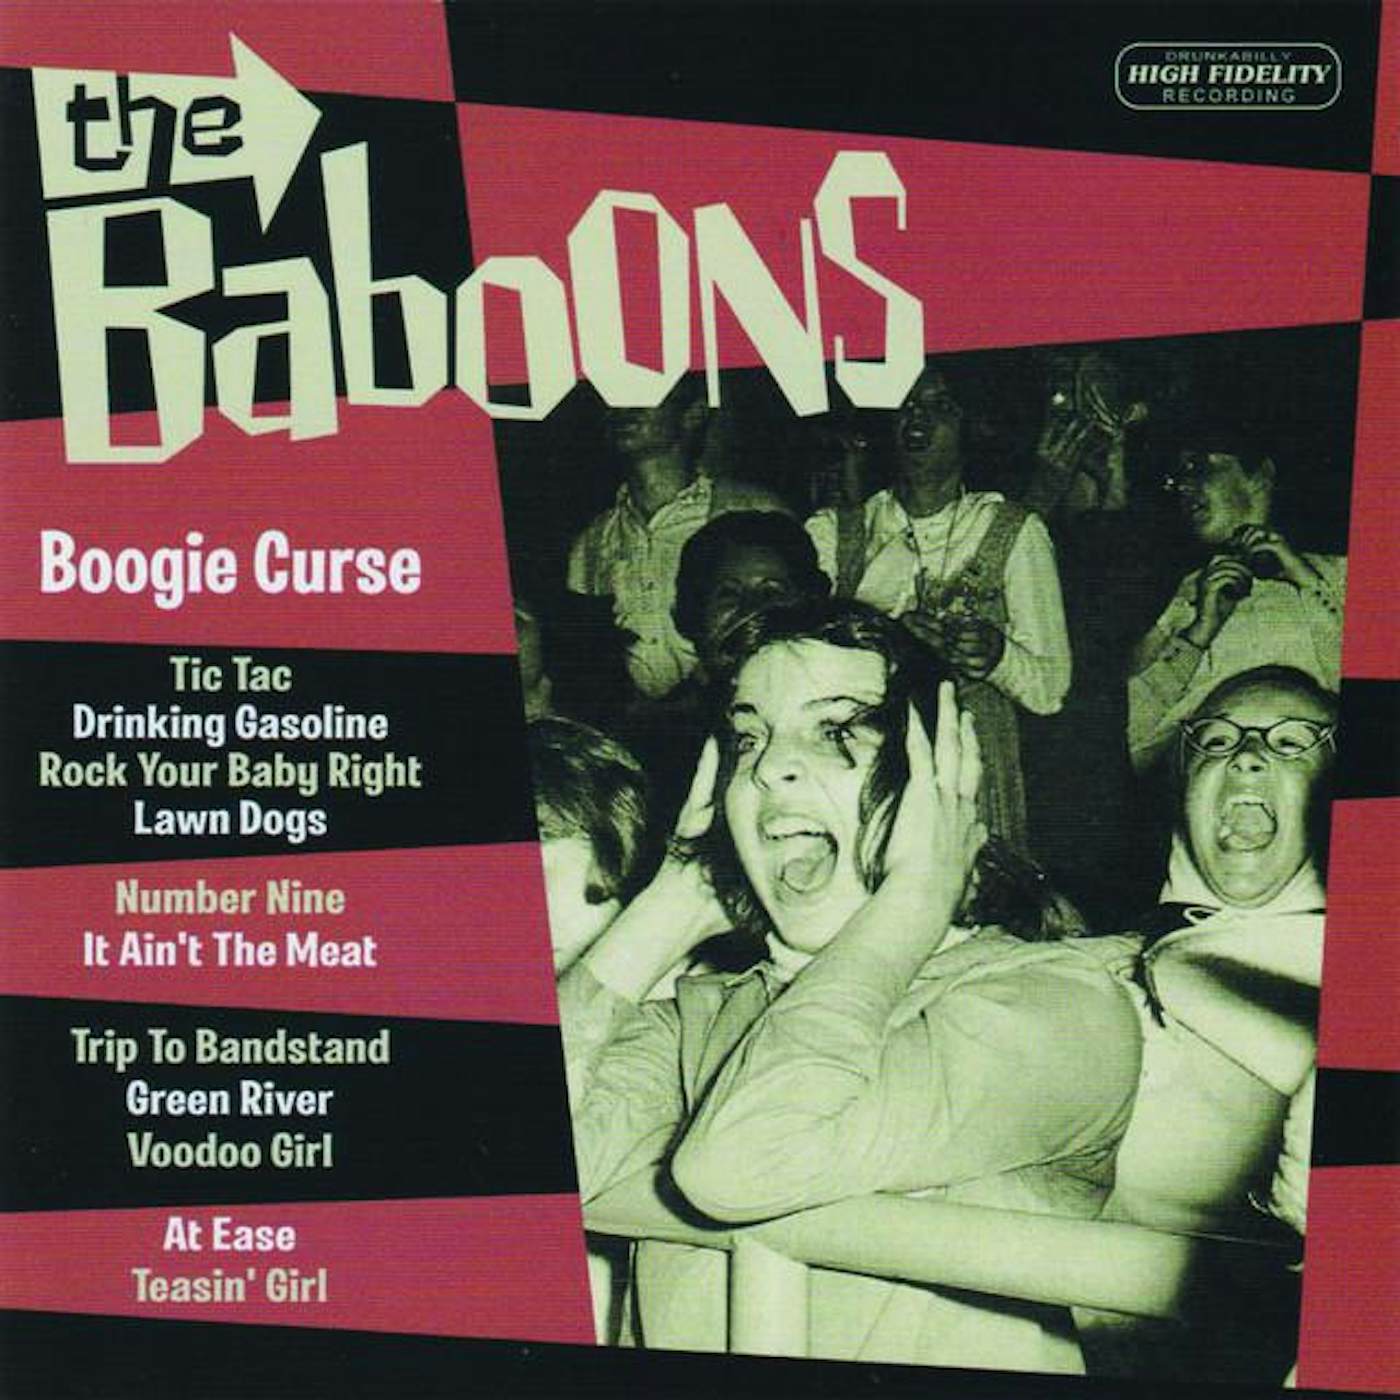 The Baboons